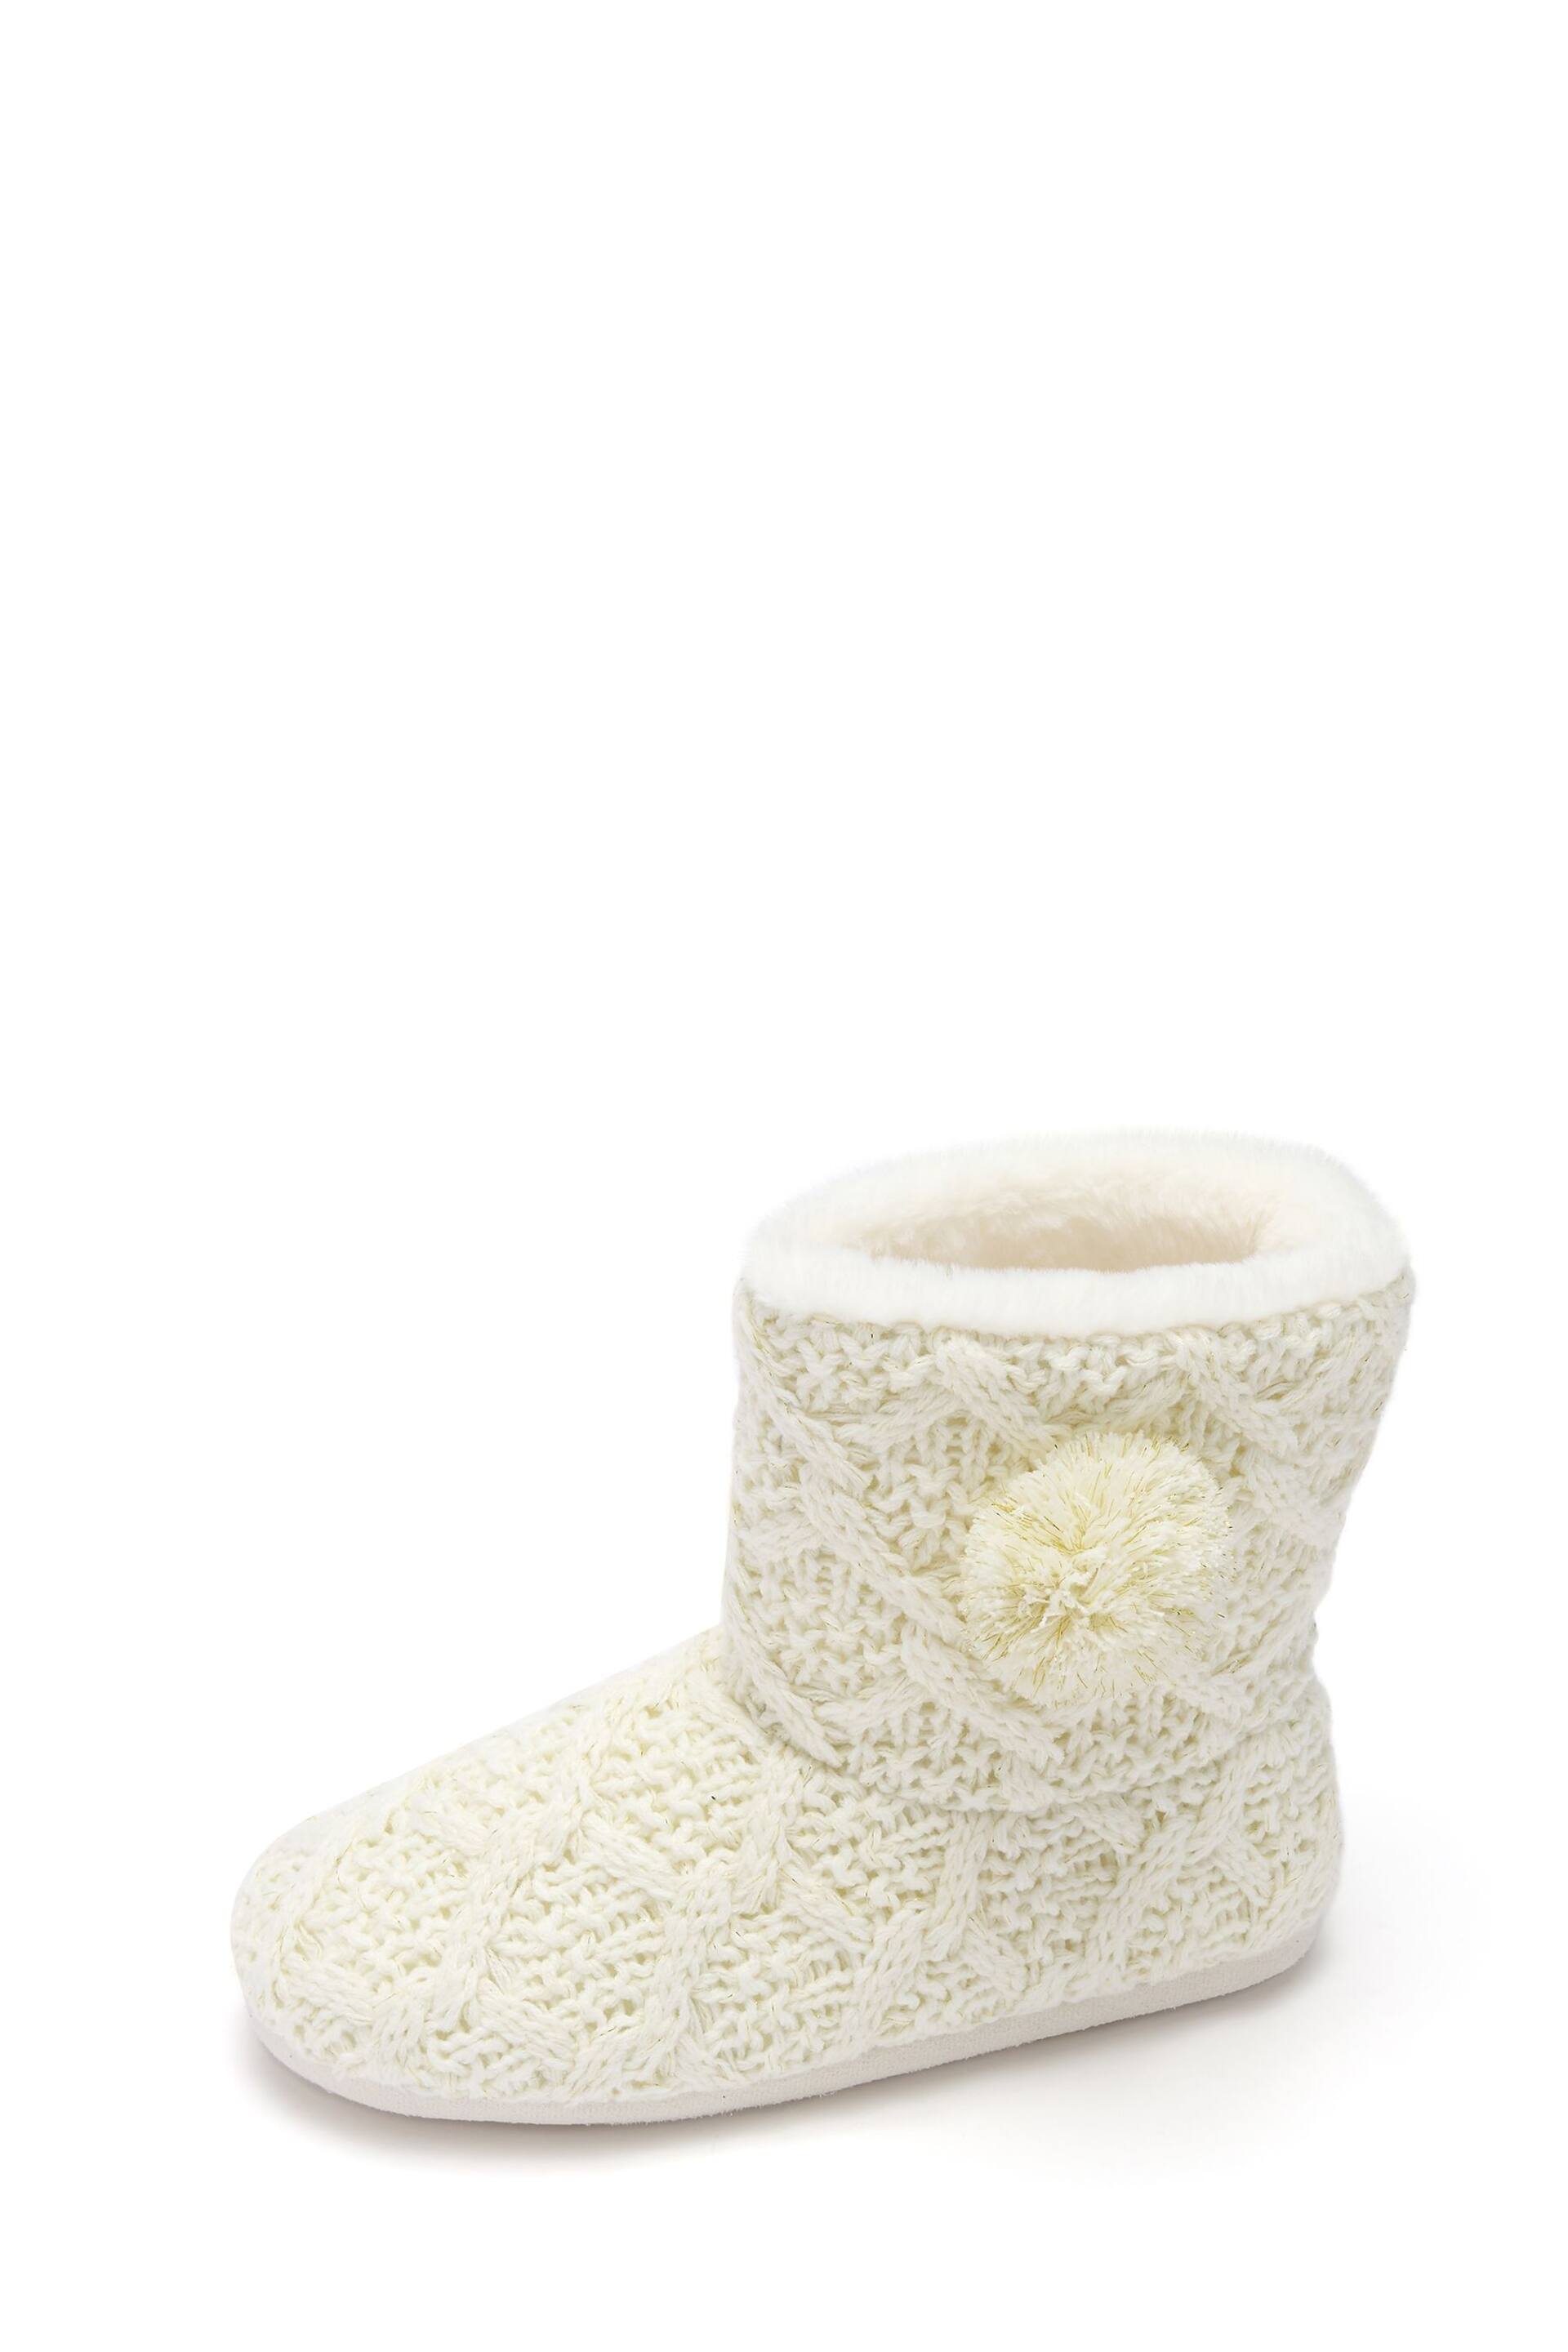 Pour Moi Cream Cable Knit Faux Fur Lined Bootie Slipper - Image 3 of 3